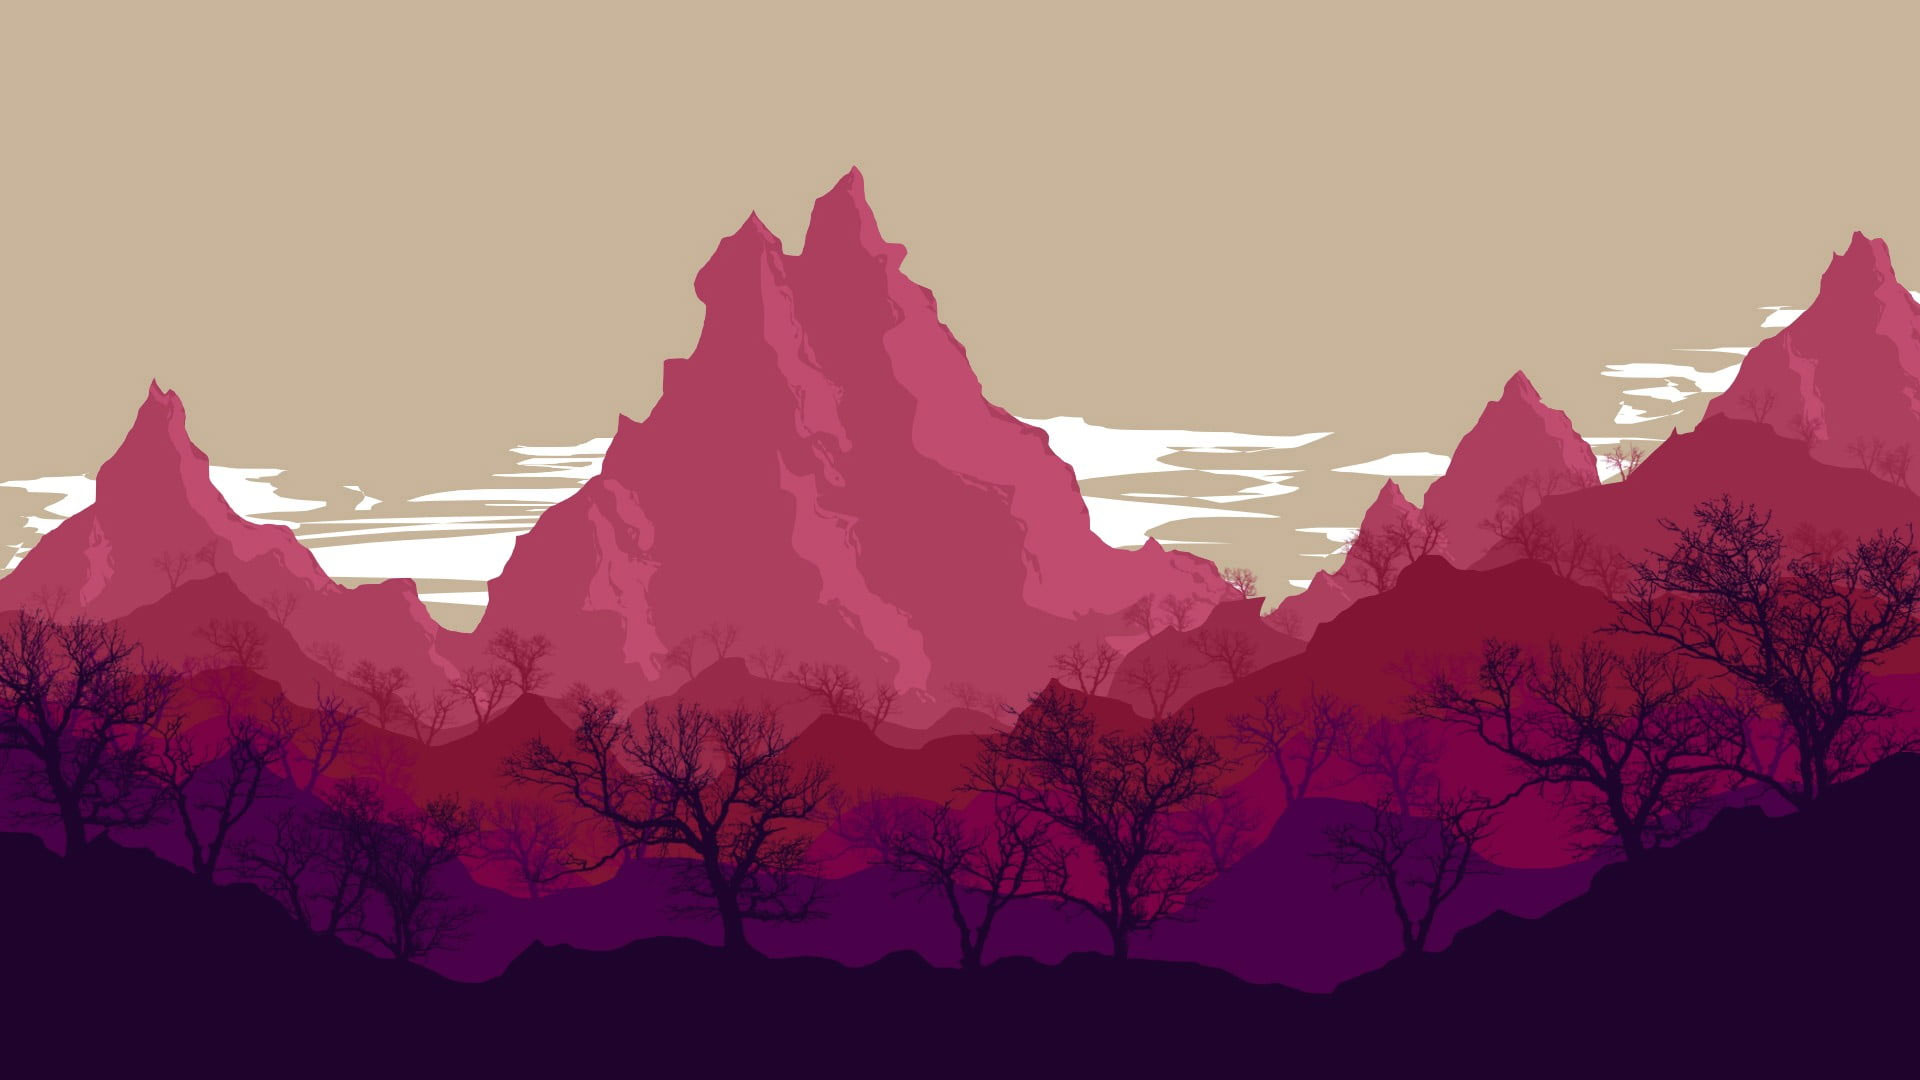 Silhouette of bared trees and pink mountains illustration, digital art wallpaper